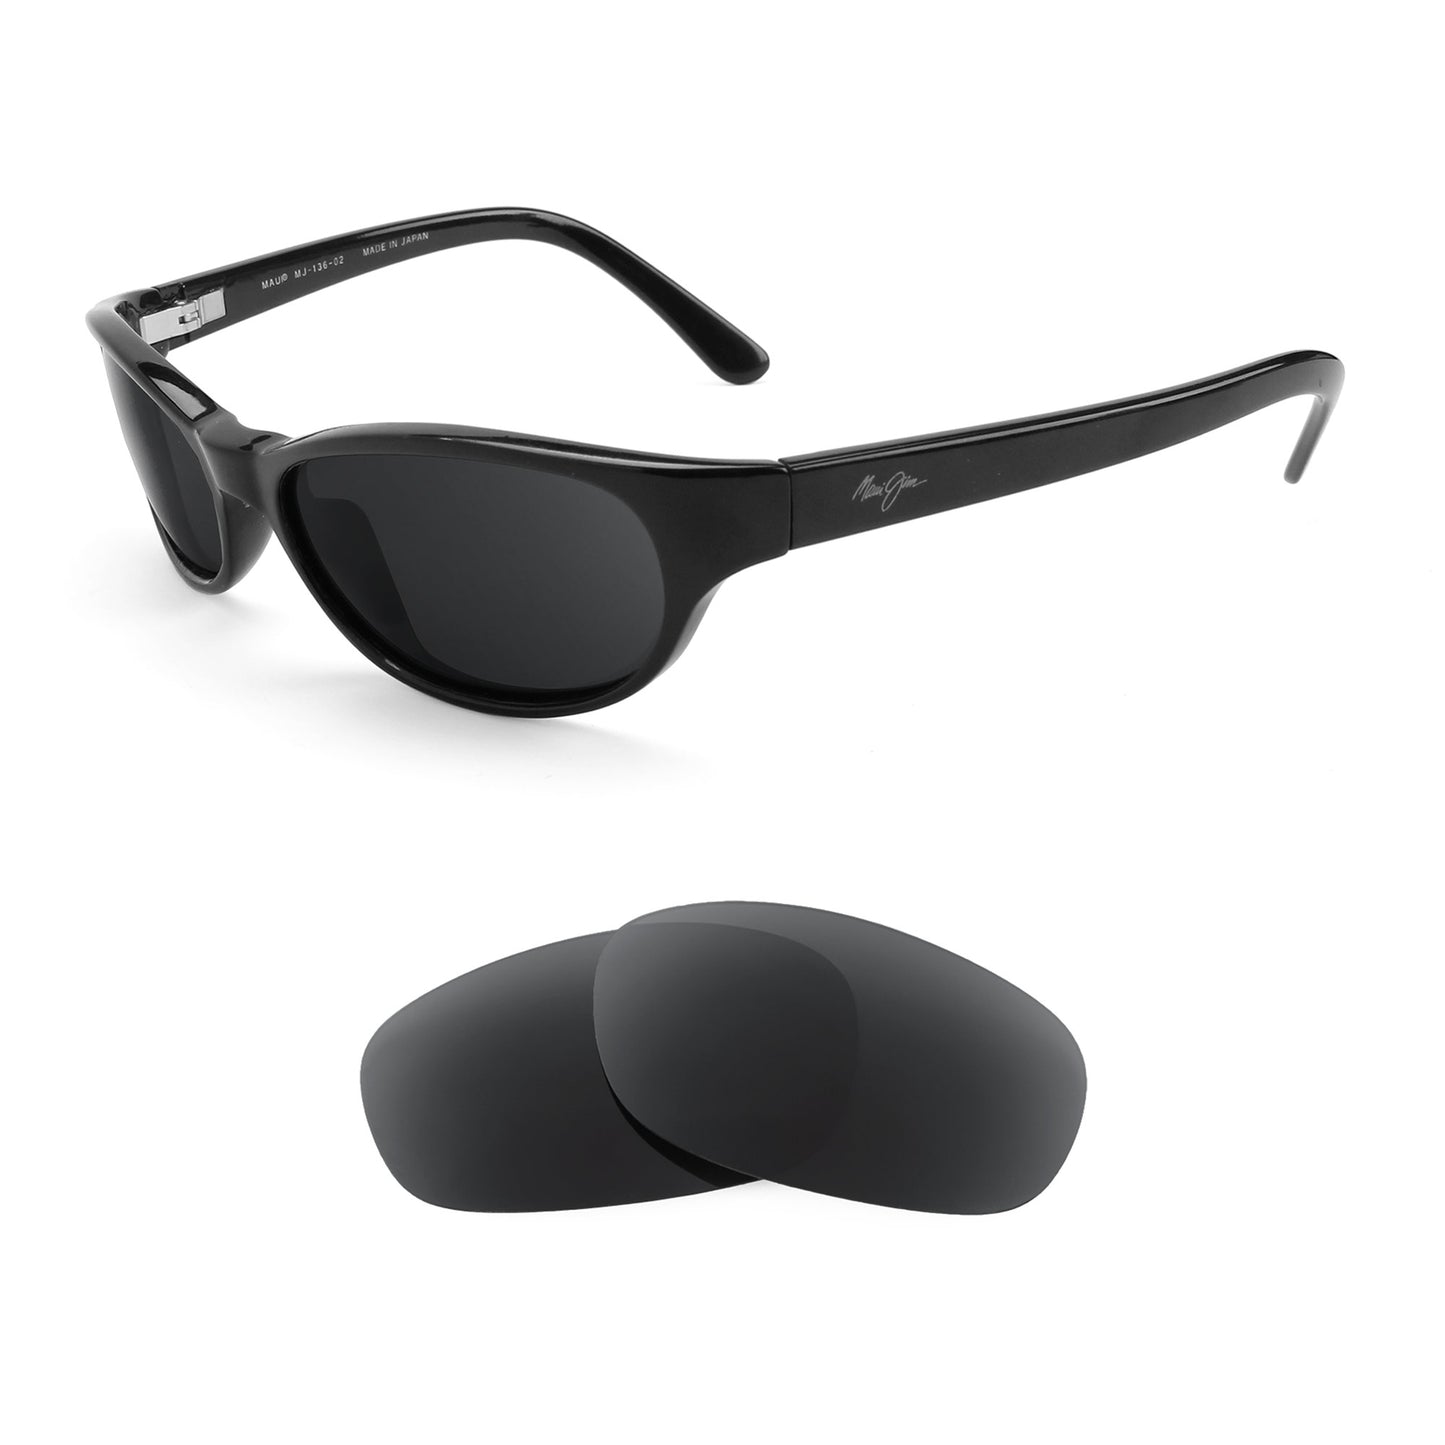 Maui Jim Cyclone MJ136 sunglasses with replacement lenses